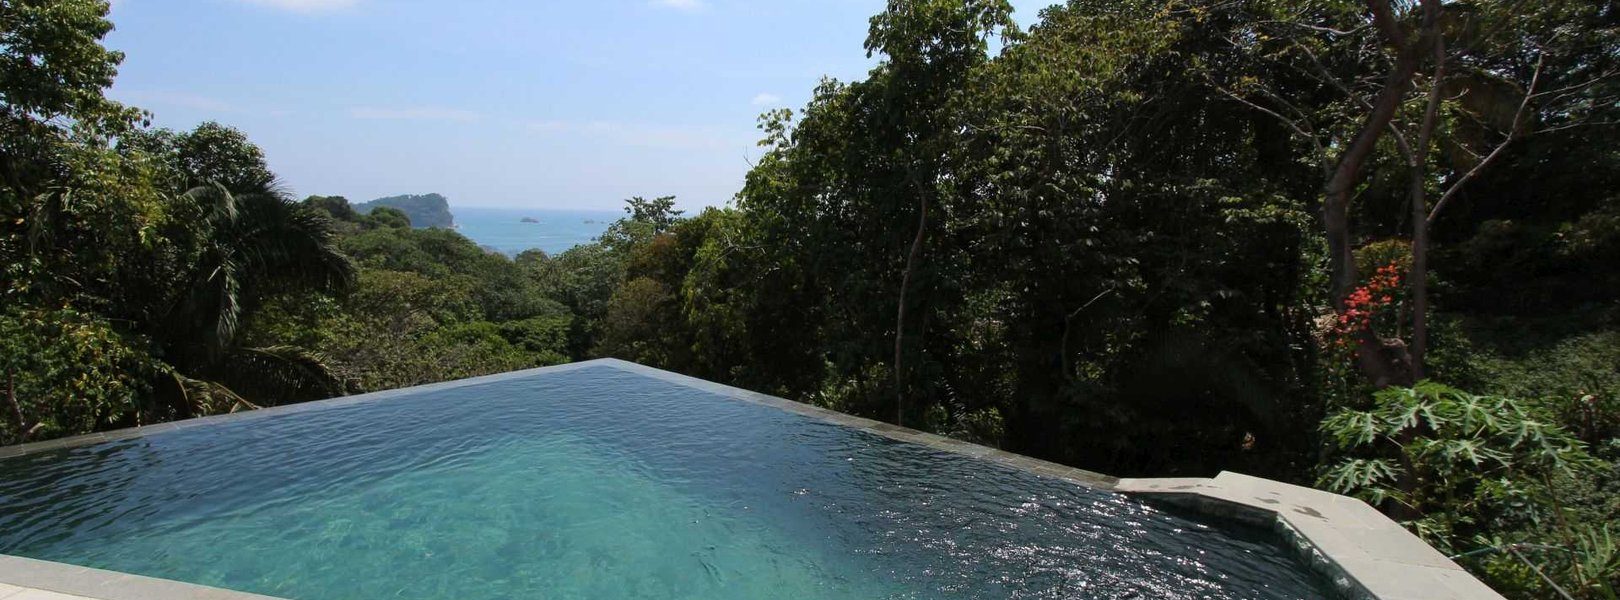 From this beautiful infinity pool you have a direct view of the Manuel Antonio coastline.